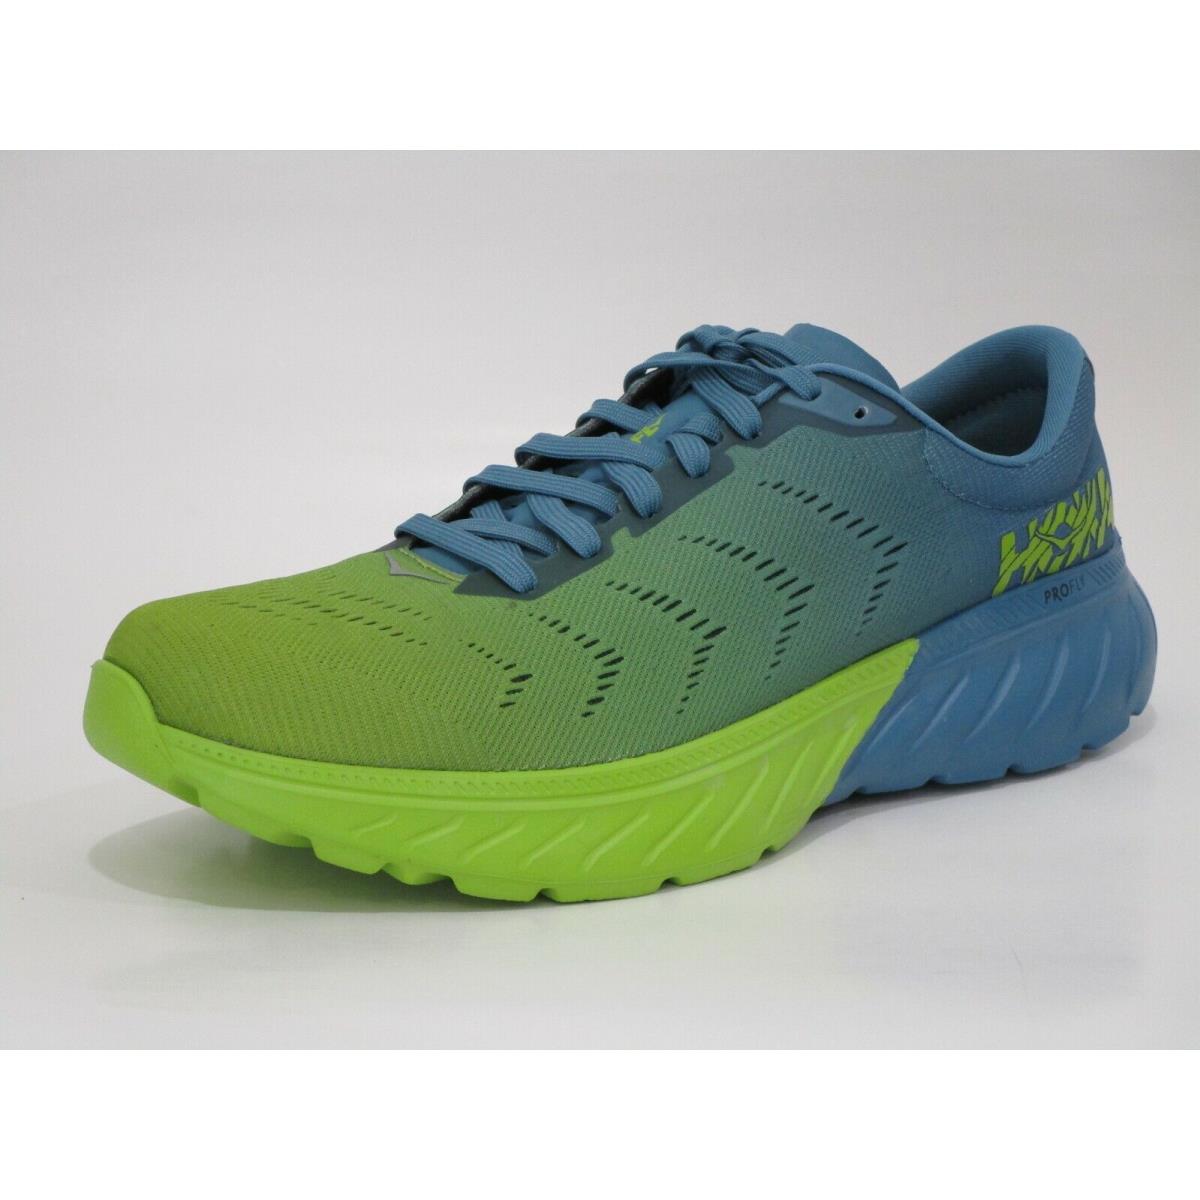 capital come Restrict Hoka One One Men`s Mach 2 Running Sneaker Shoes Size 14 M US | 042101174280  - Hoka shoes One One Mach - Storm Blue / Lime Green | SporTipTop